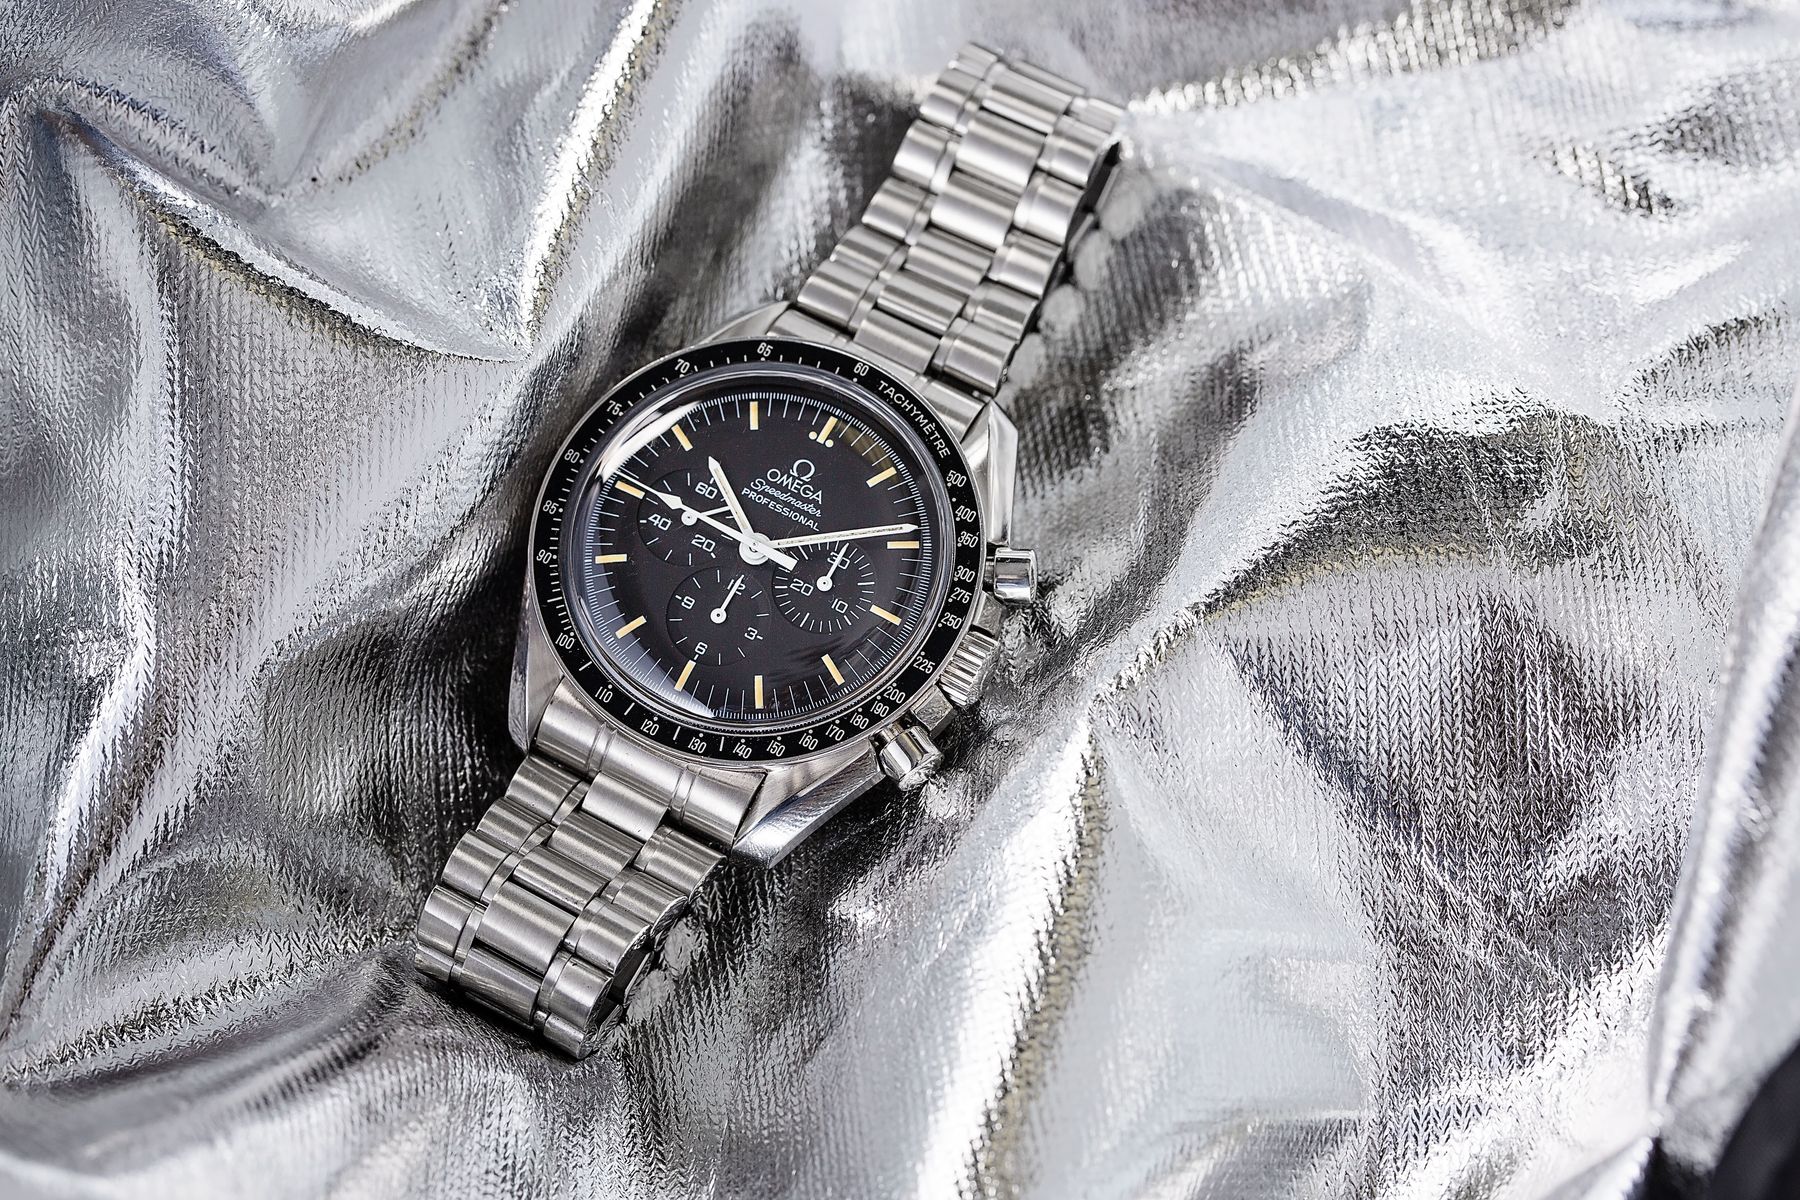 Omega Speedmaster Professional Moonwatch Reference 145.022